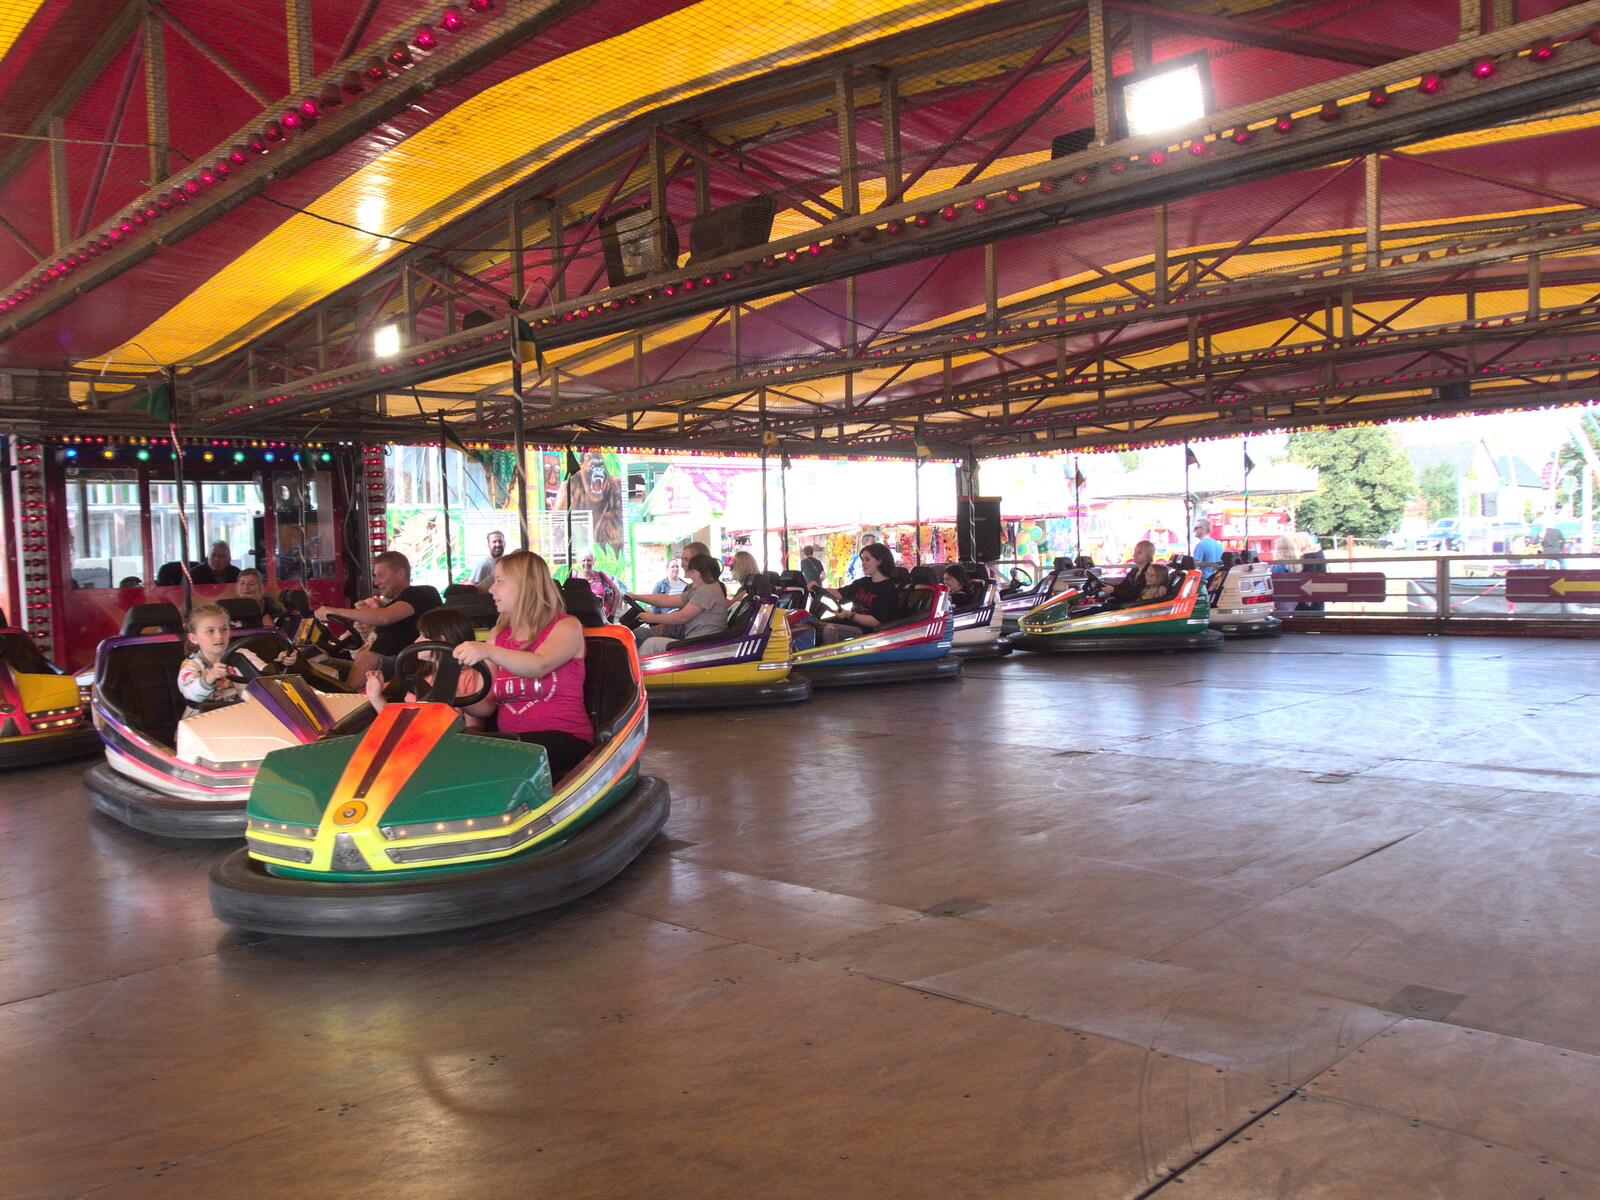 We do a session on the dodgems from A Few Hours at the Fair, Fair Green, Diss, Norfolk - 5th September 2021